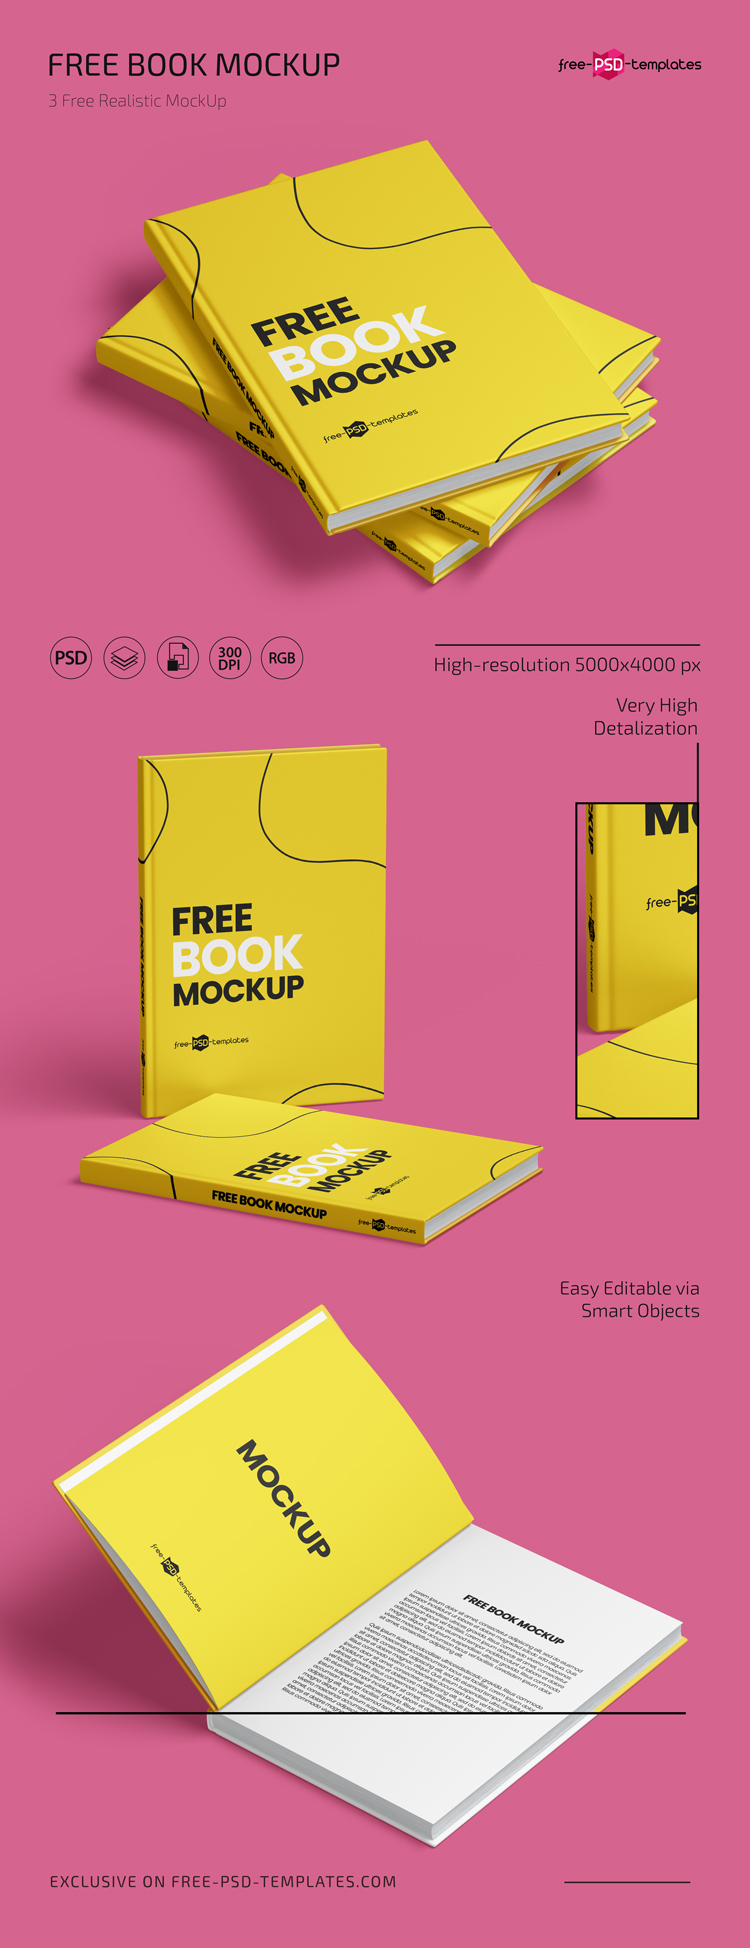 Download Free Book Mockups In Psd Free Psd Templates